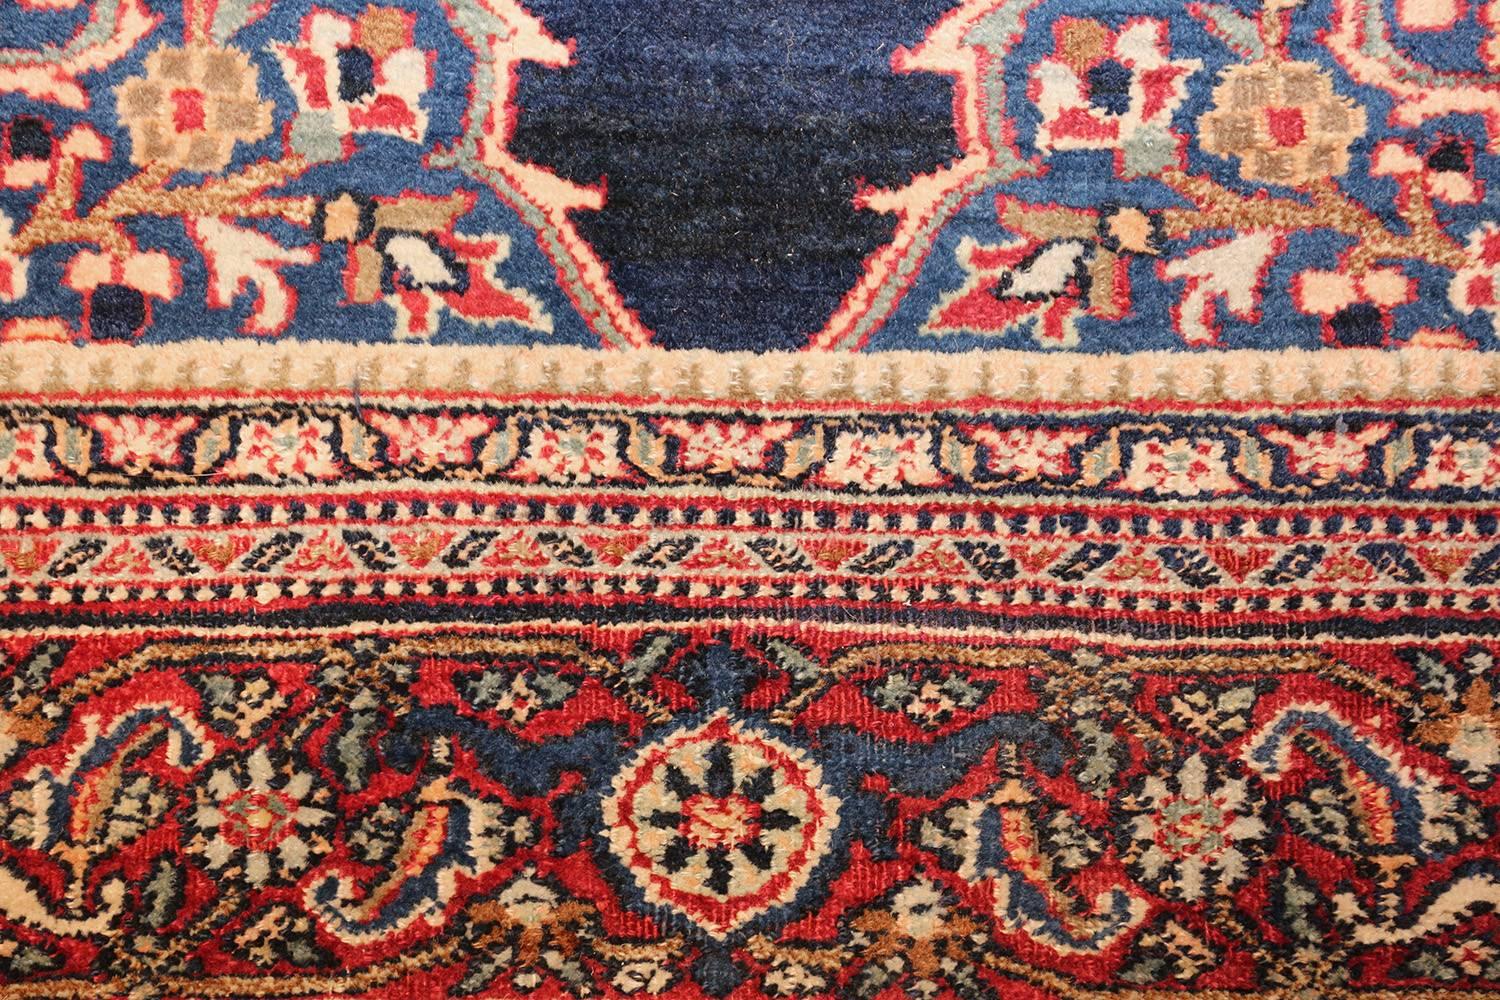 Antique Persian Khorassan rug, origin: Persia, circa first quarter of the 20th century. Size: 4 ft 5 in x 6 ft 8 in (1.35 m x 2.03 m)

Featuring an elaborate series of borders as well as bold and vibrant coloration throughout, this antique